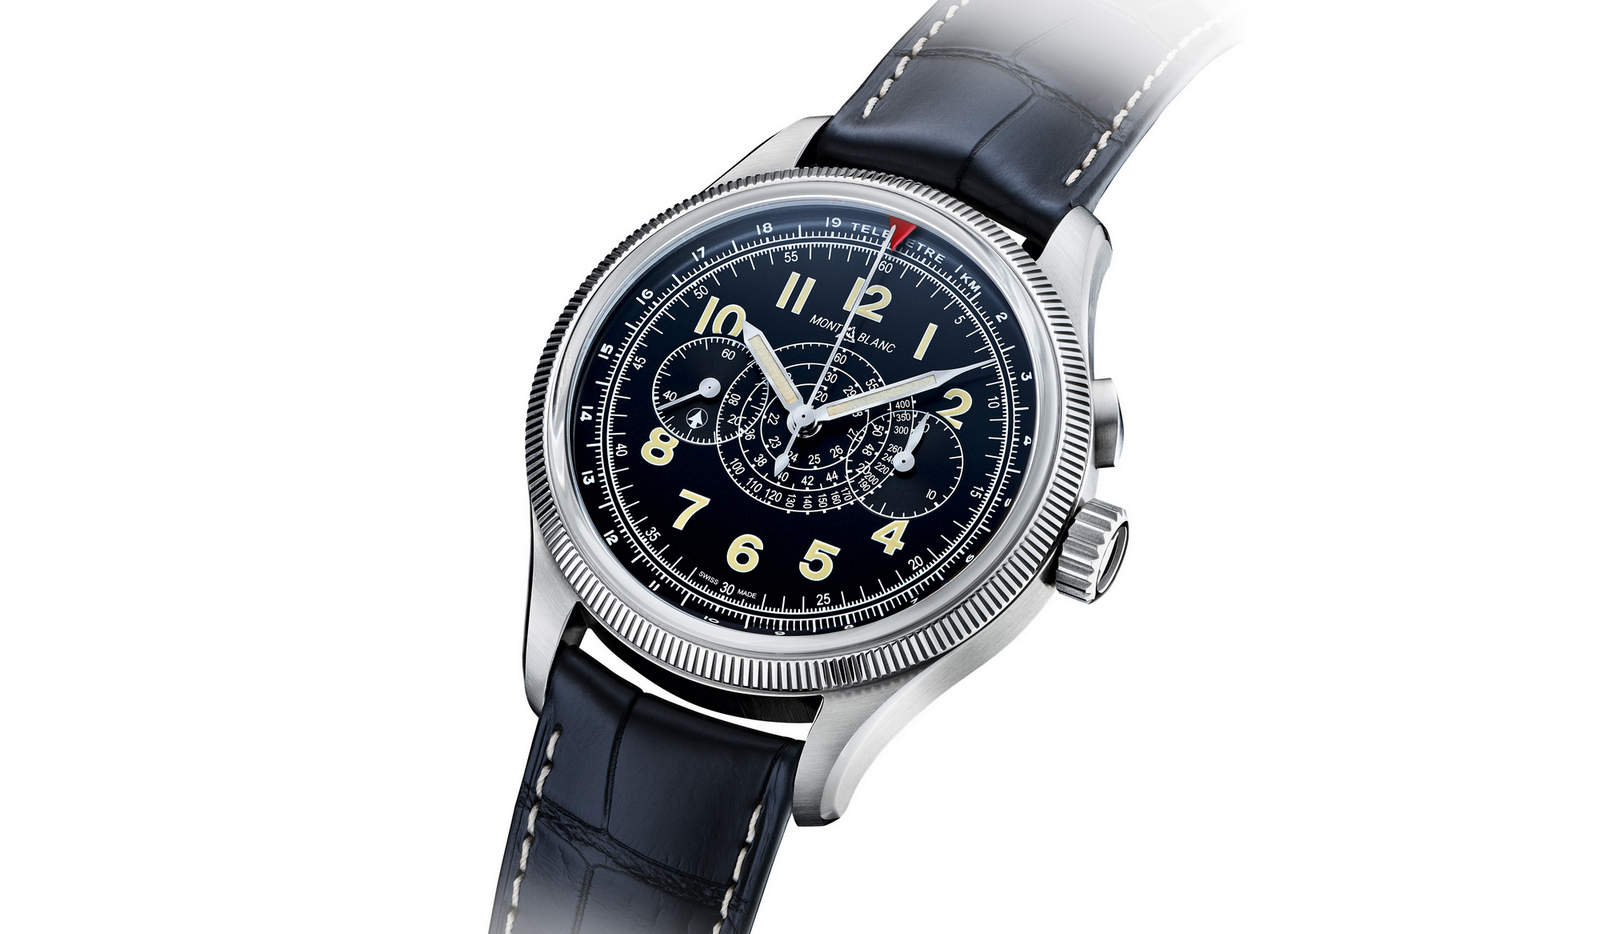 Destined for the skies, the Montblanc 1858 Minerva Monopusher Chronograph Red Arrow watch is every pilot?s fantasy